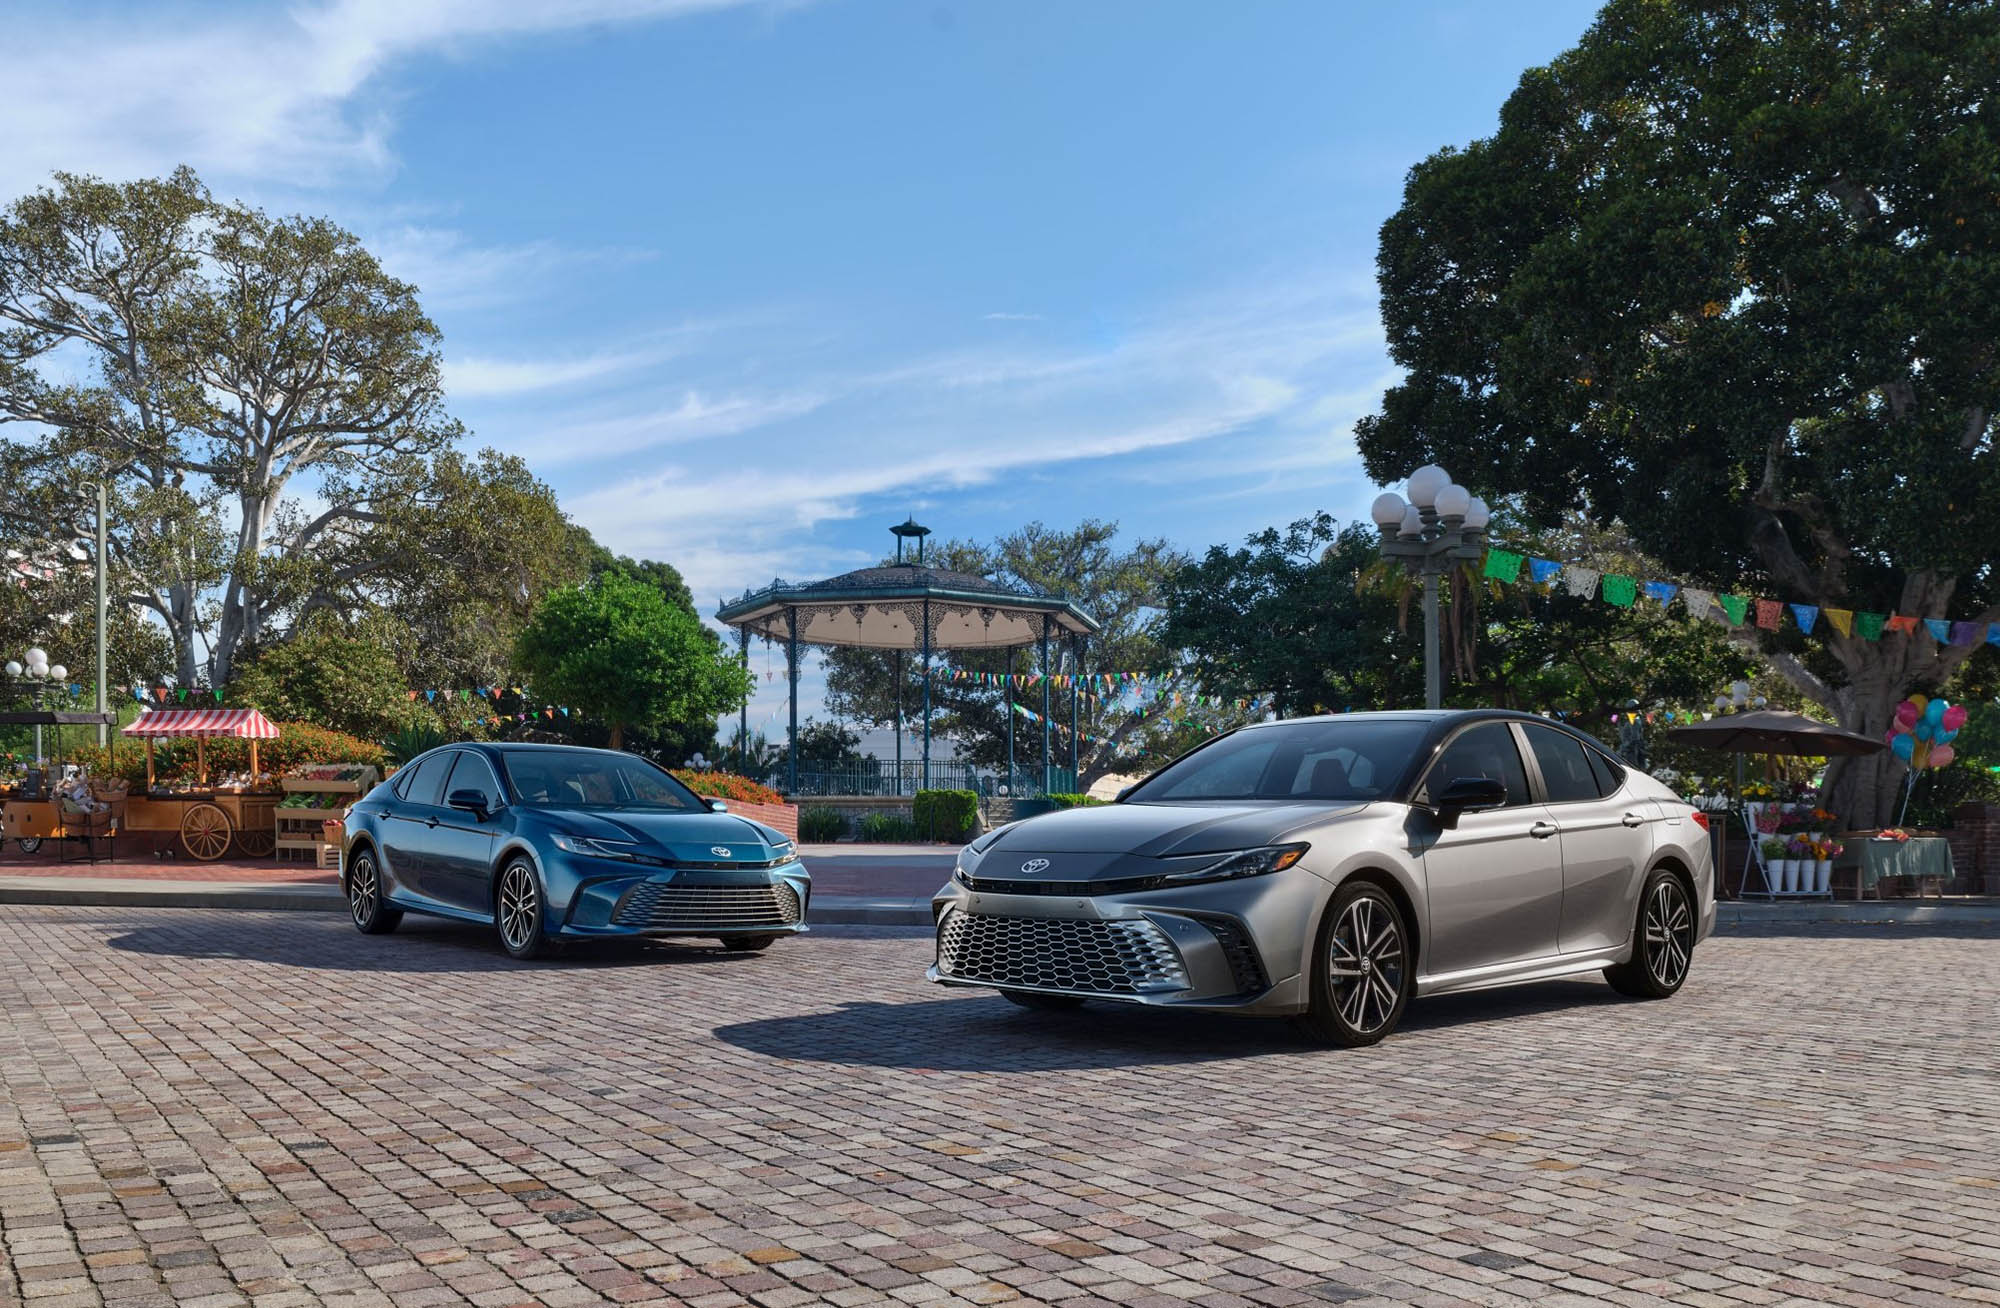 2025 Toyota Camrys in blue and gray at an amusement park